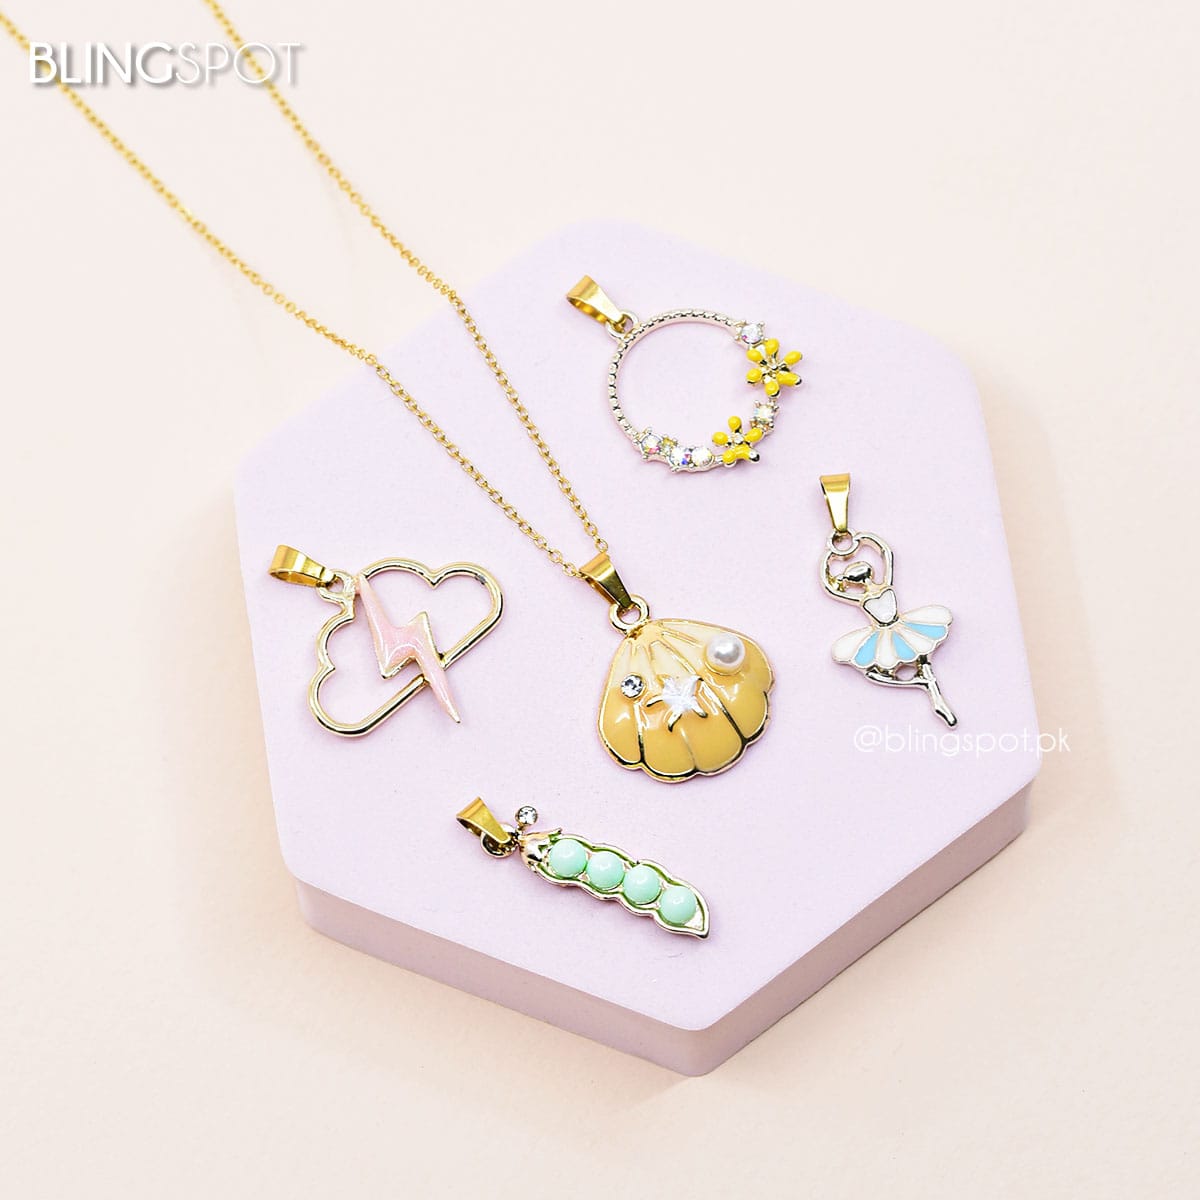 Bling Style 2 - Necklace Set